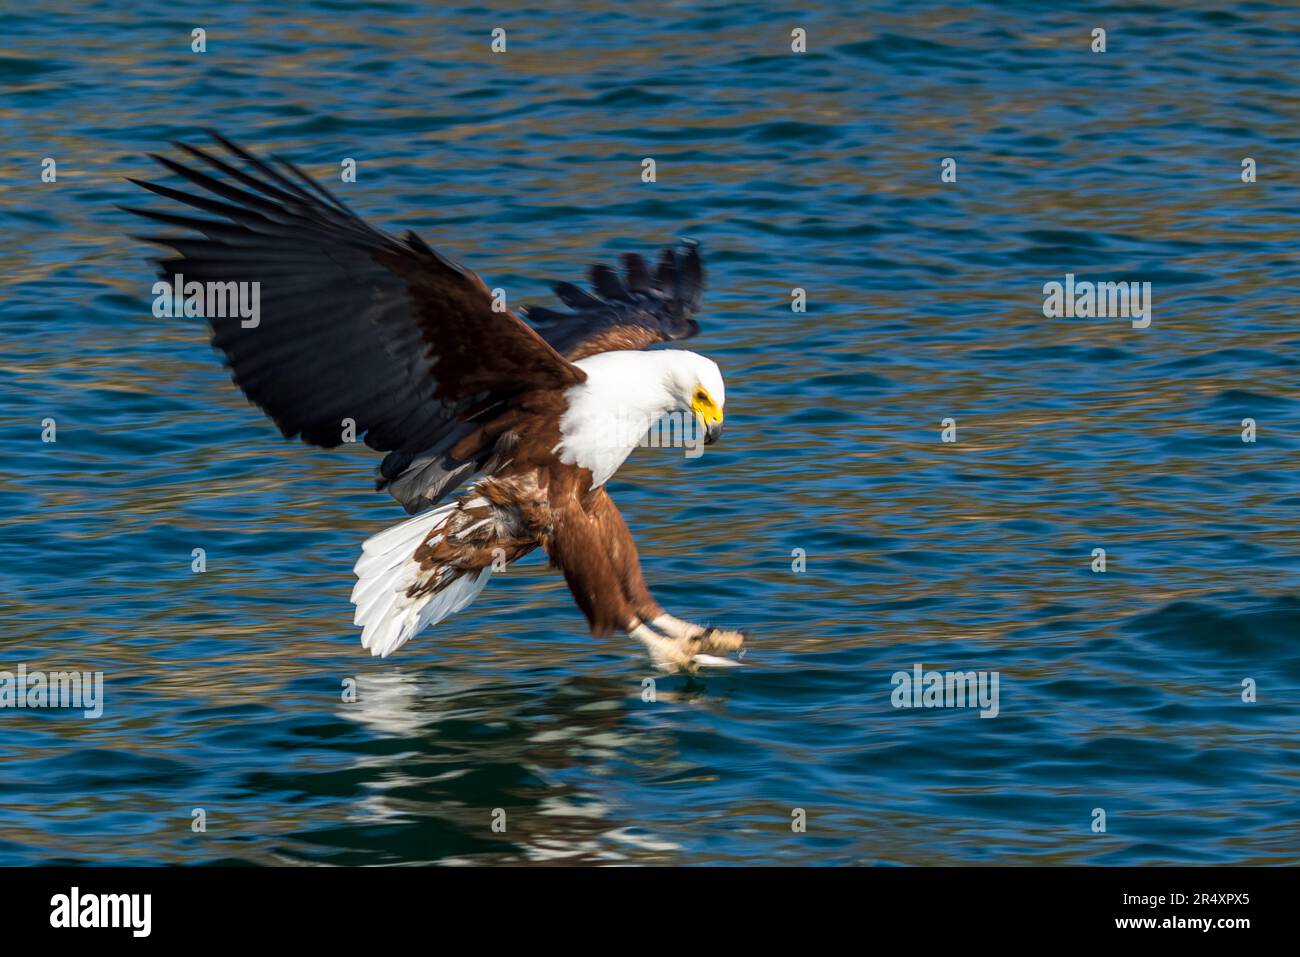 Bald eagle catches a fish in lake Malawi at Otter Point, Malawi. Bald eagle on Lake Malawi near Cape Maclear approaching a bait fish in the water, Lake Malawi National Park. Stock Photo